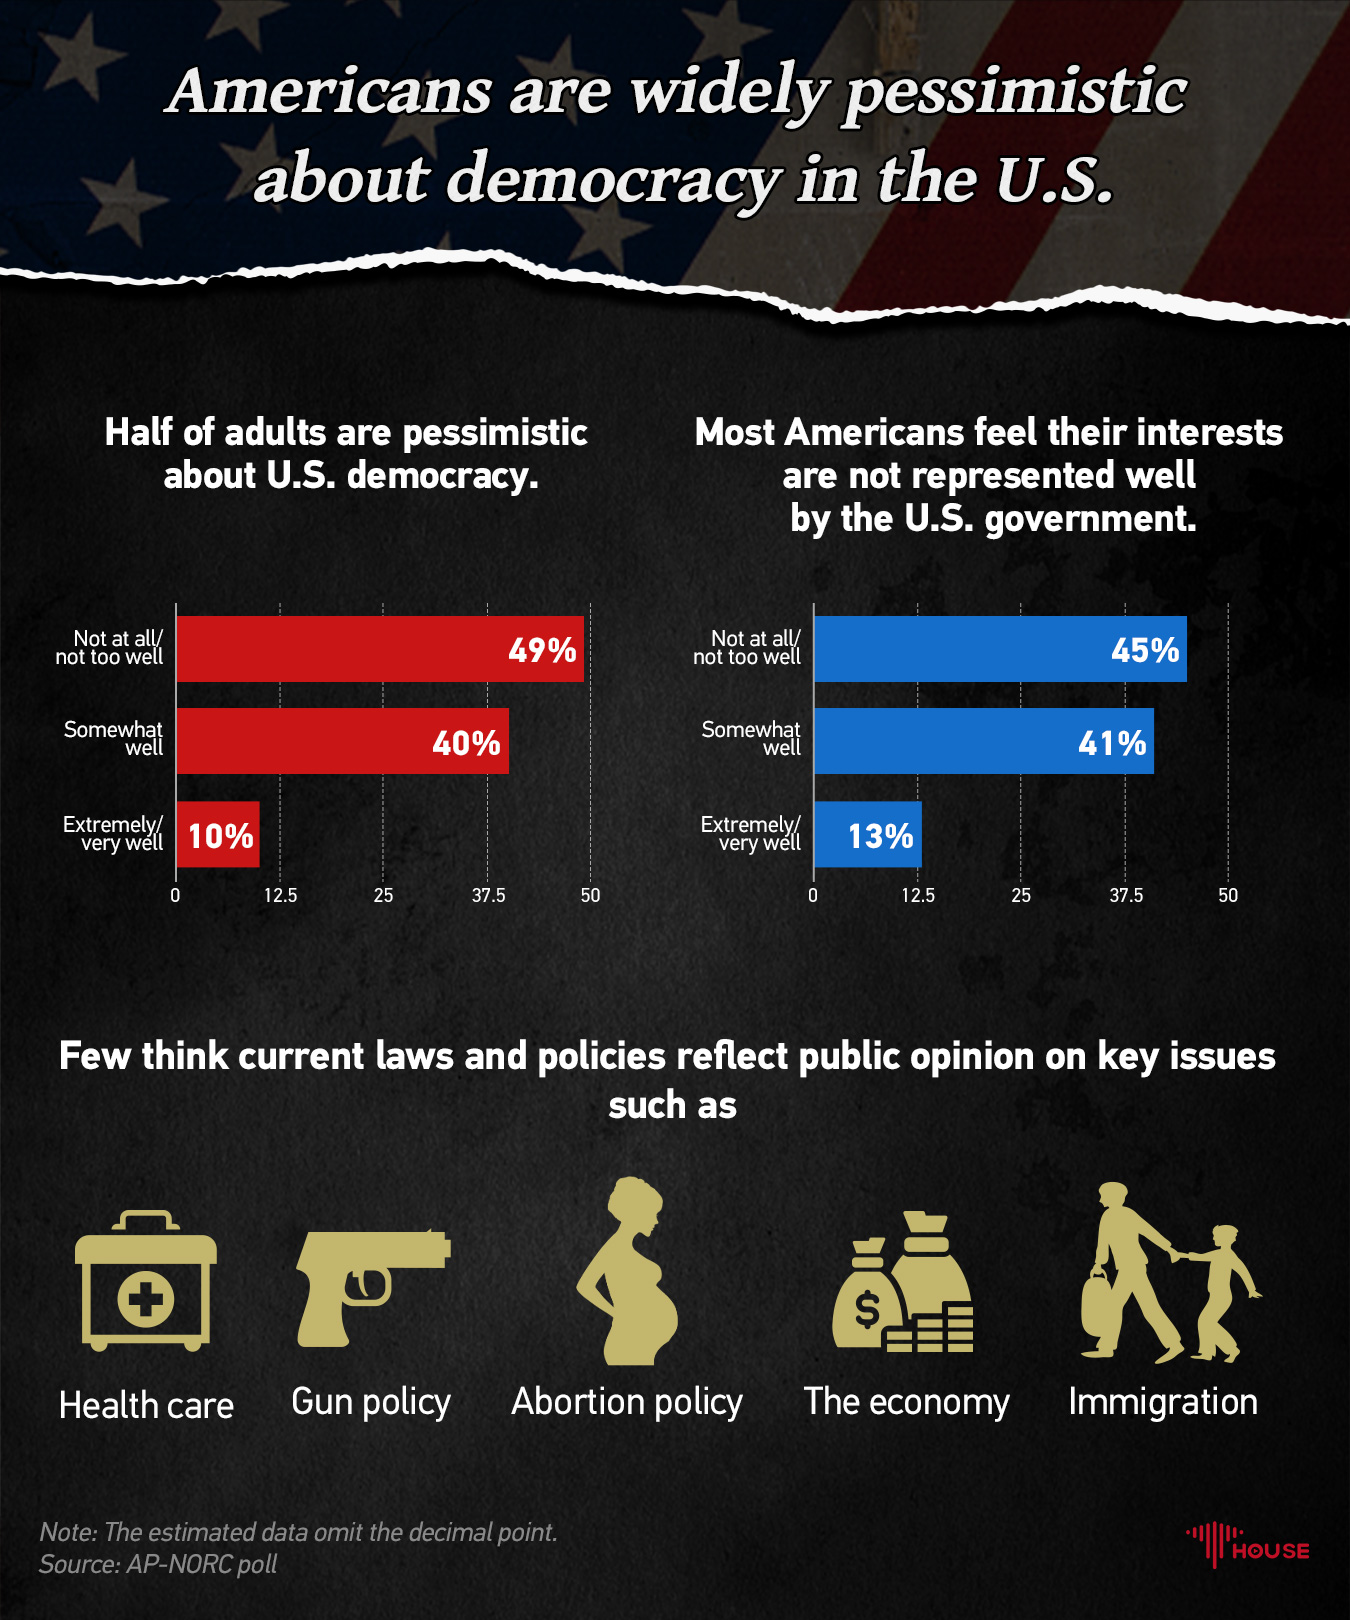 Americans are widely pessimistic about democracy in the U.S.